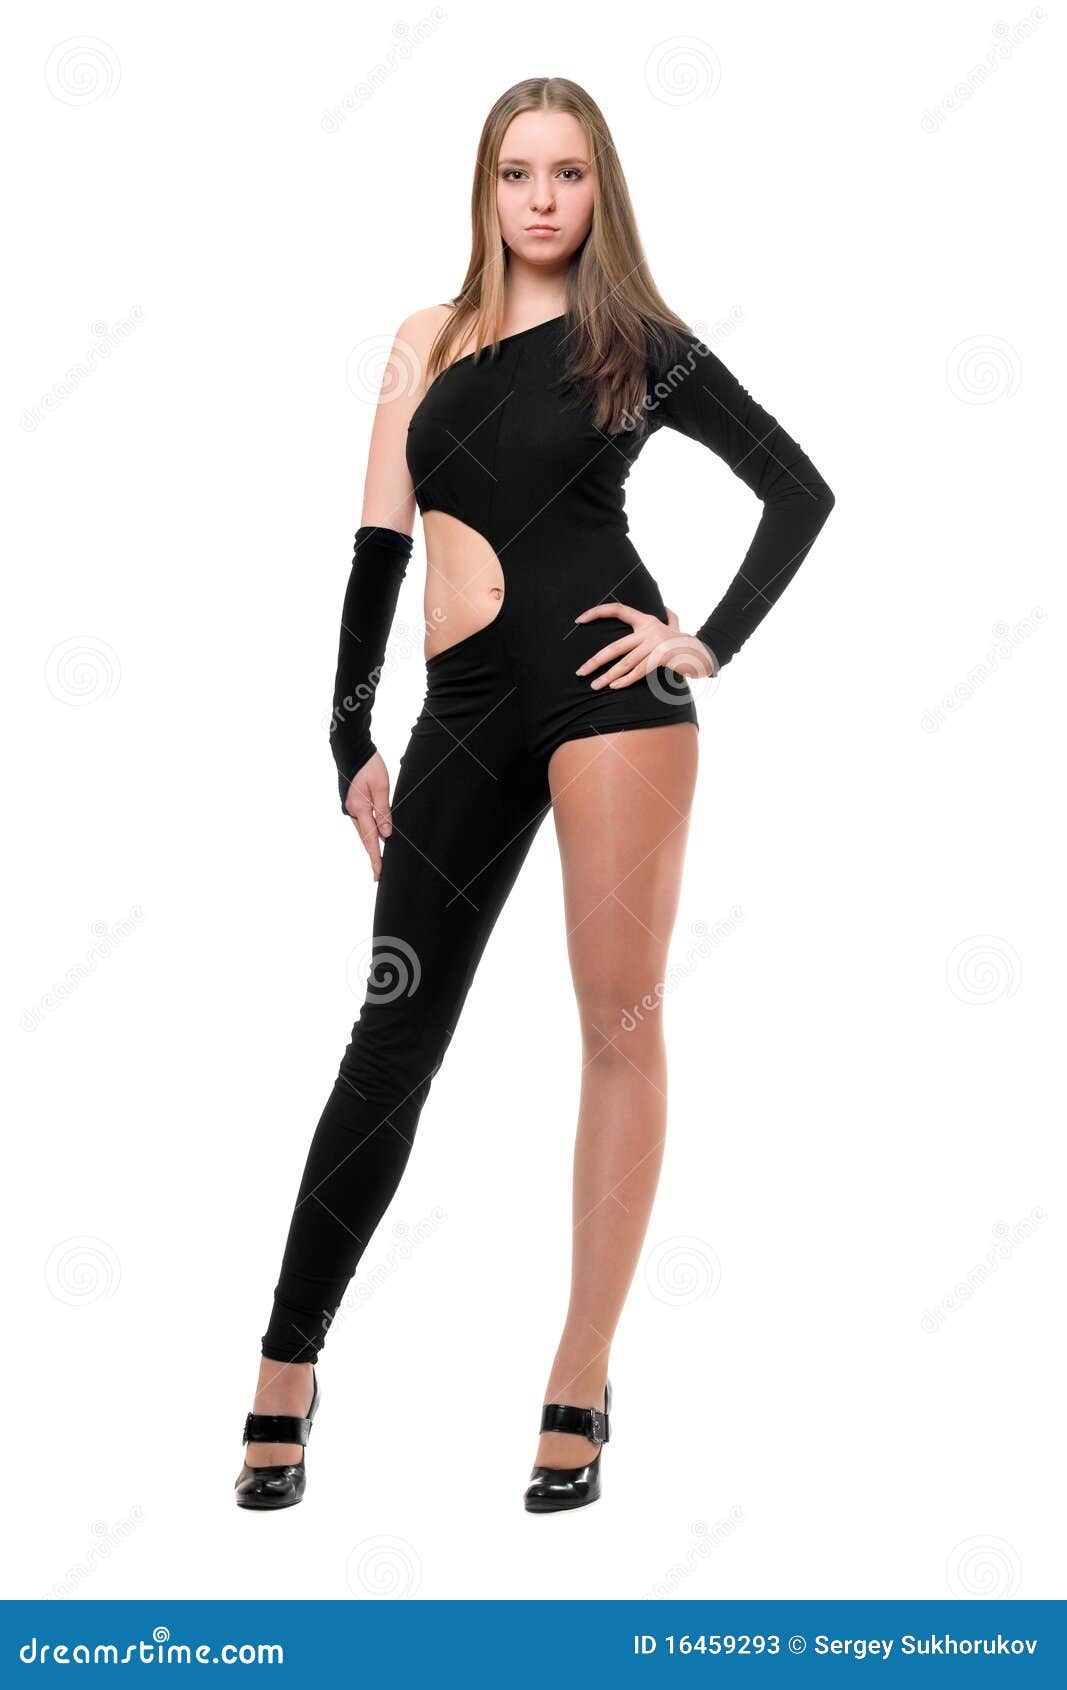 young woman in skintight black costume